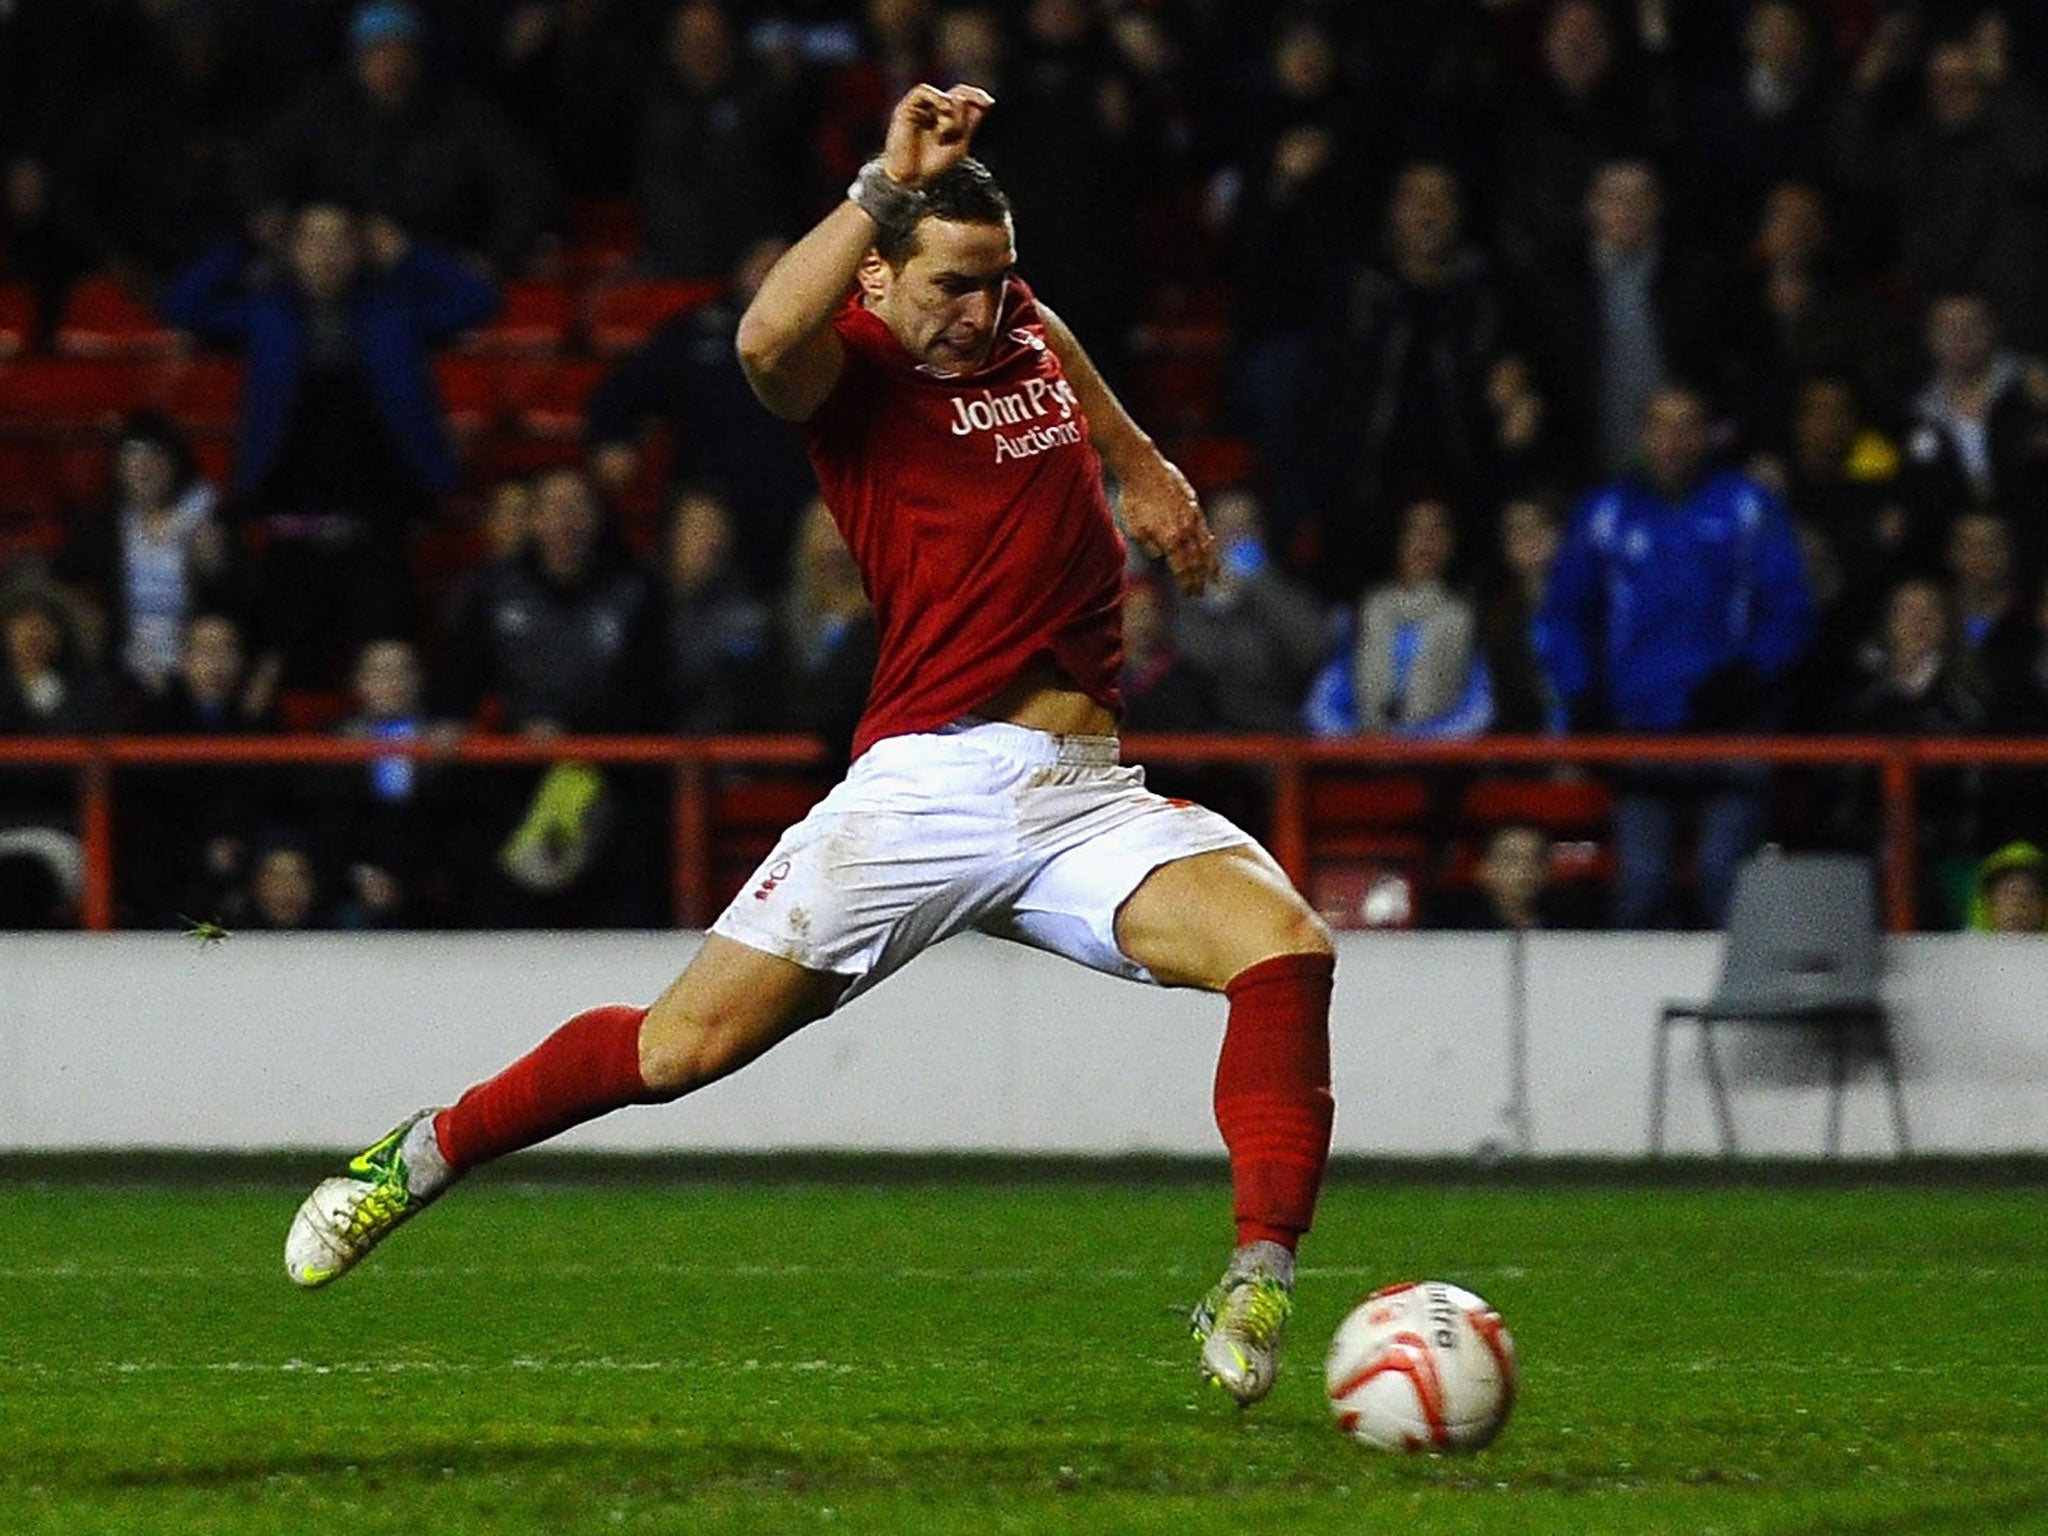 Sharp shooter: Billy Sharp scores the equaliser for Forest in added time